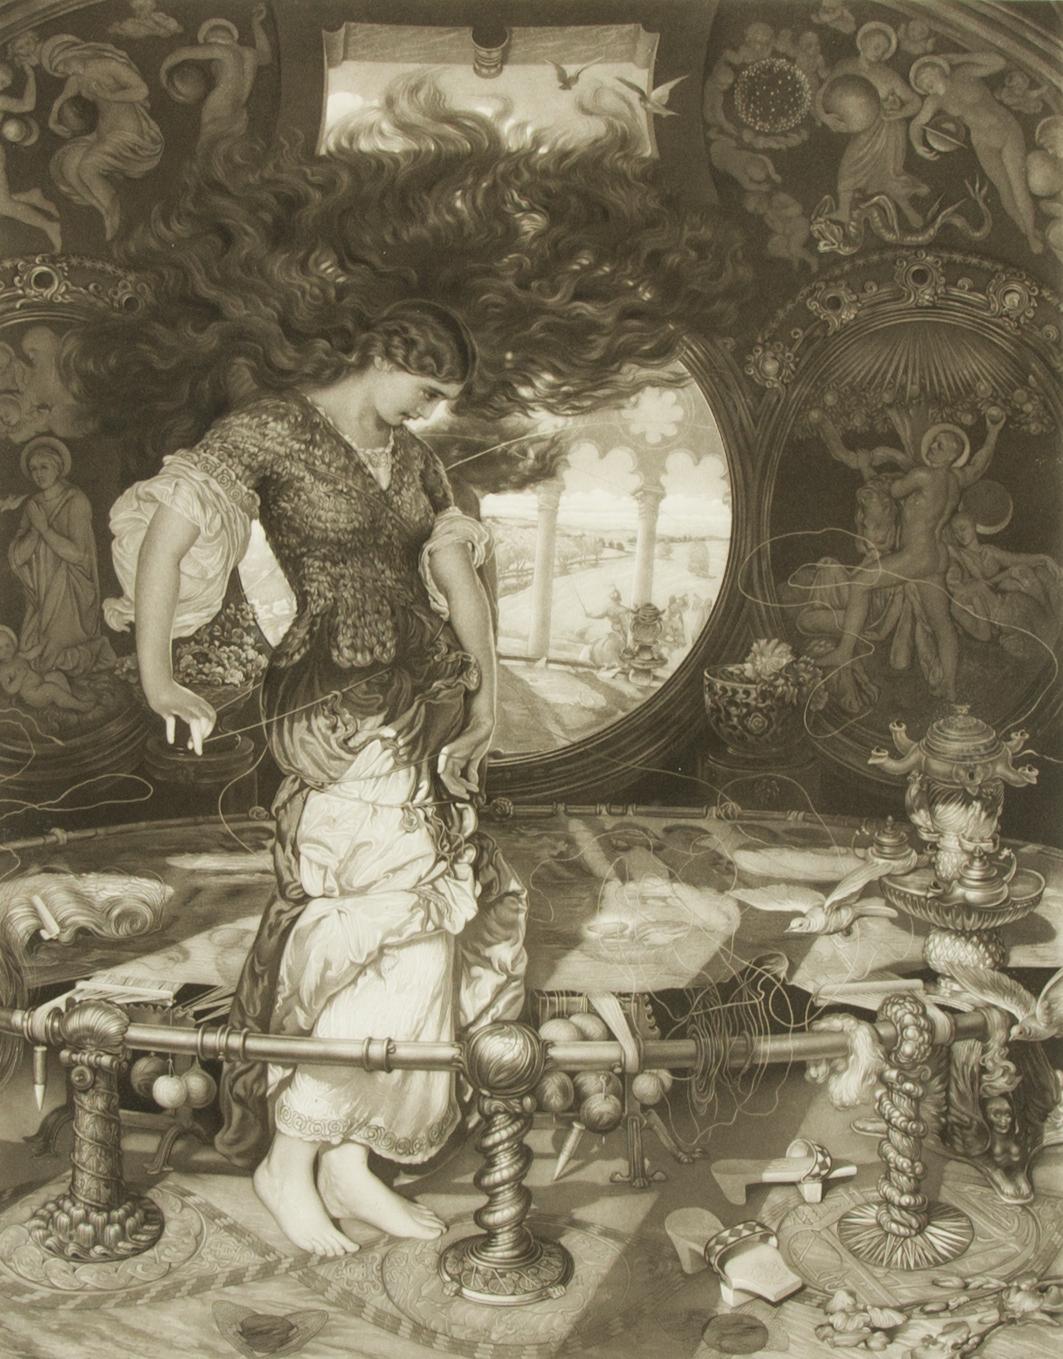 After William Holman Hunt (1827-1910), engraving by Joseph D. Miller depicting 'The Lady of Shallot'. Well presented in a fluted gilt frame. Signed in plate. On wove.

Image Size: 62 x 48cm (24.4